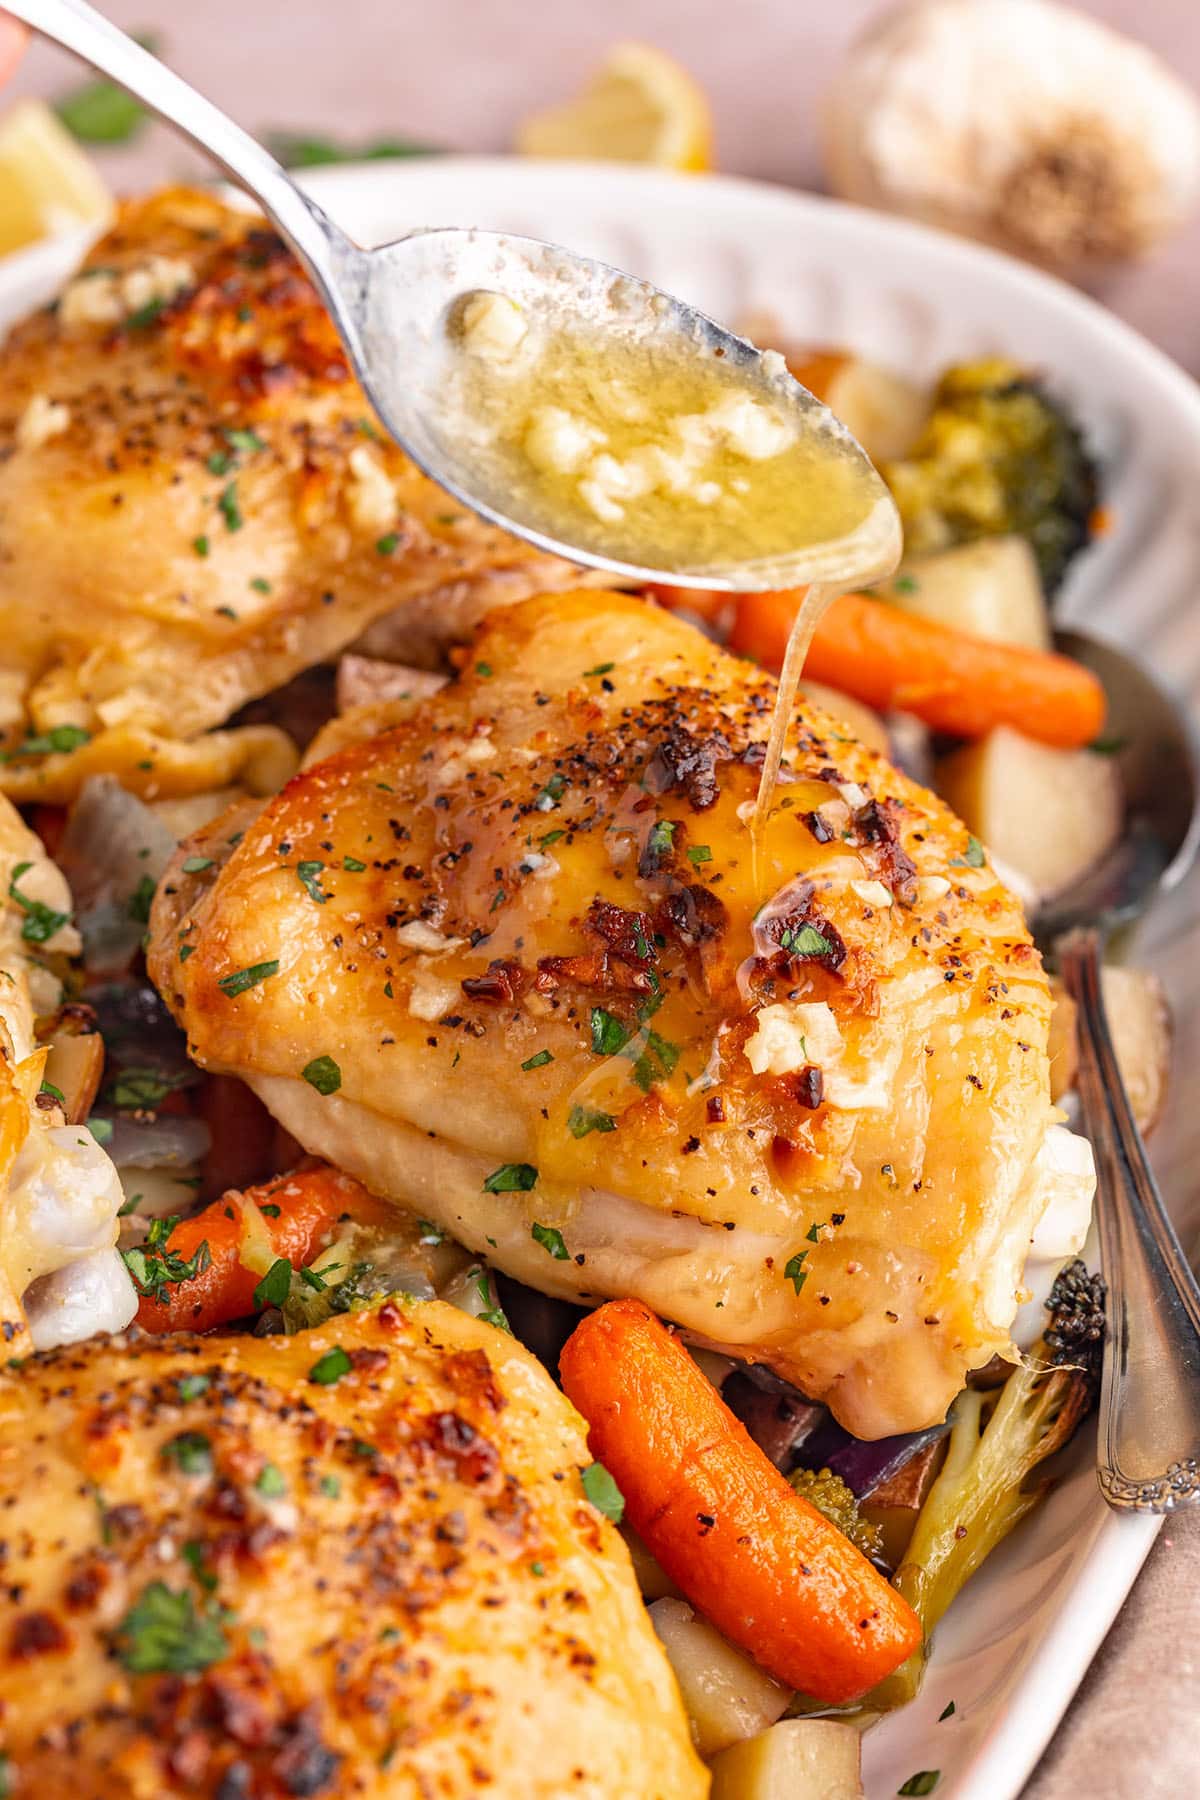 Garlic butter sauce being spooned over a one-pan chicken thigh and oven-roasted veggies.